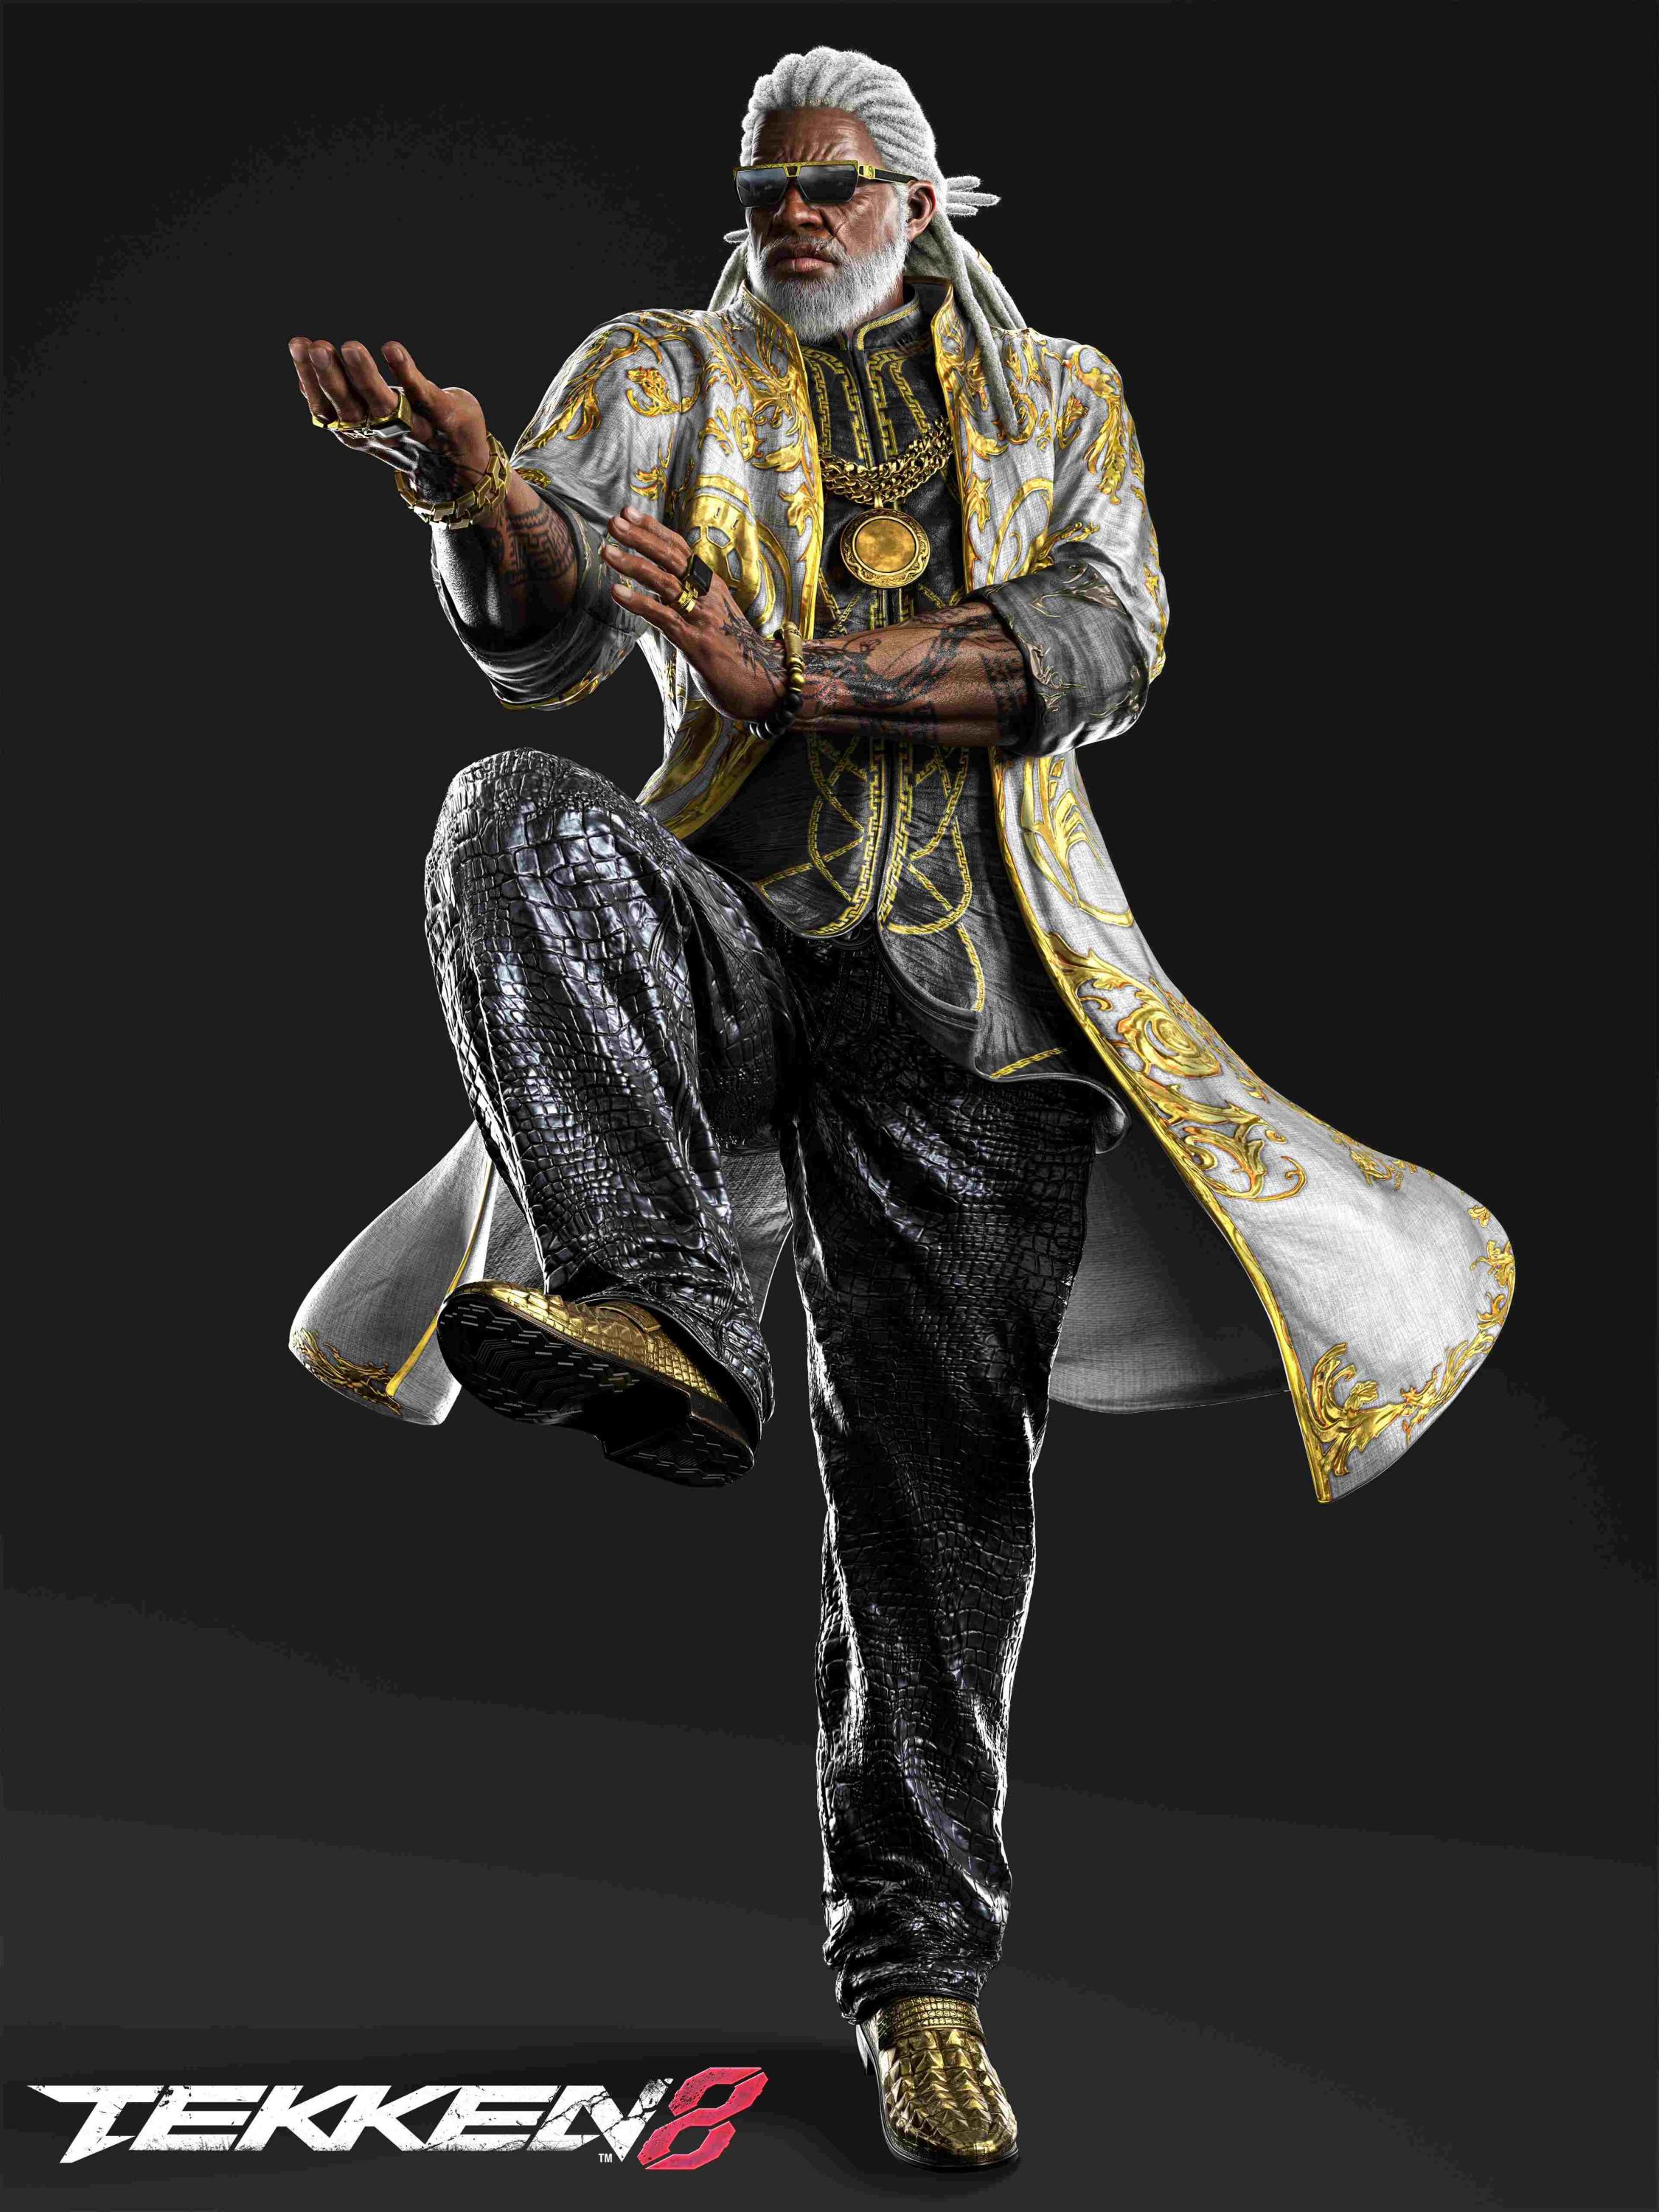 Official character render of Leroy